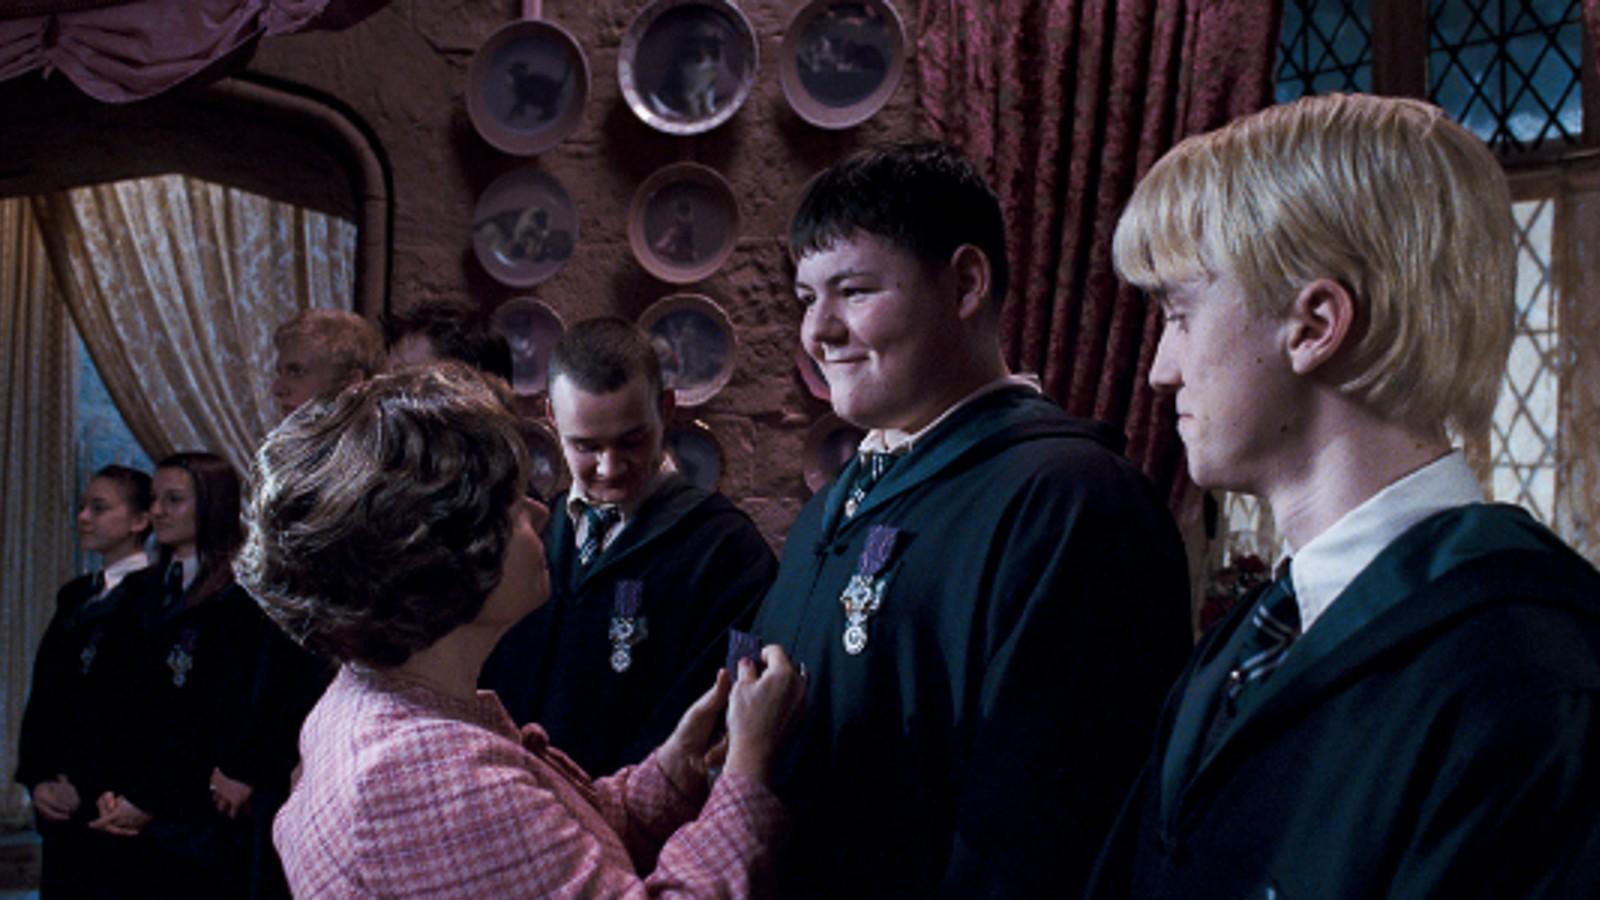 A still of Slytherins from Order of the Phoenix